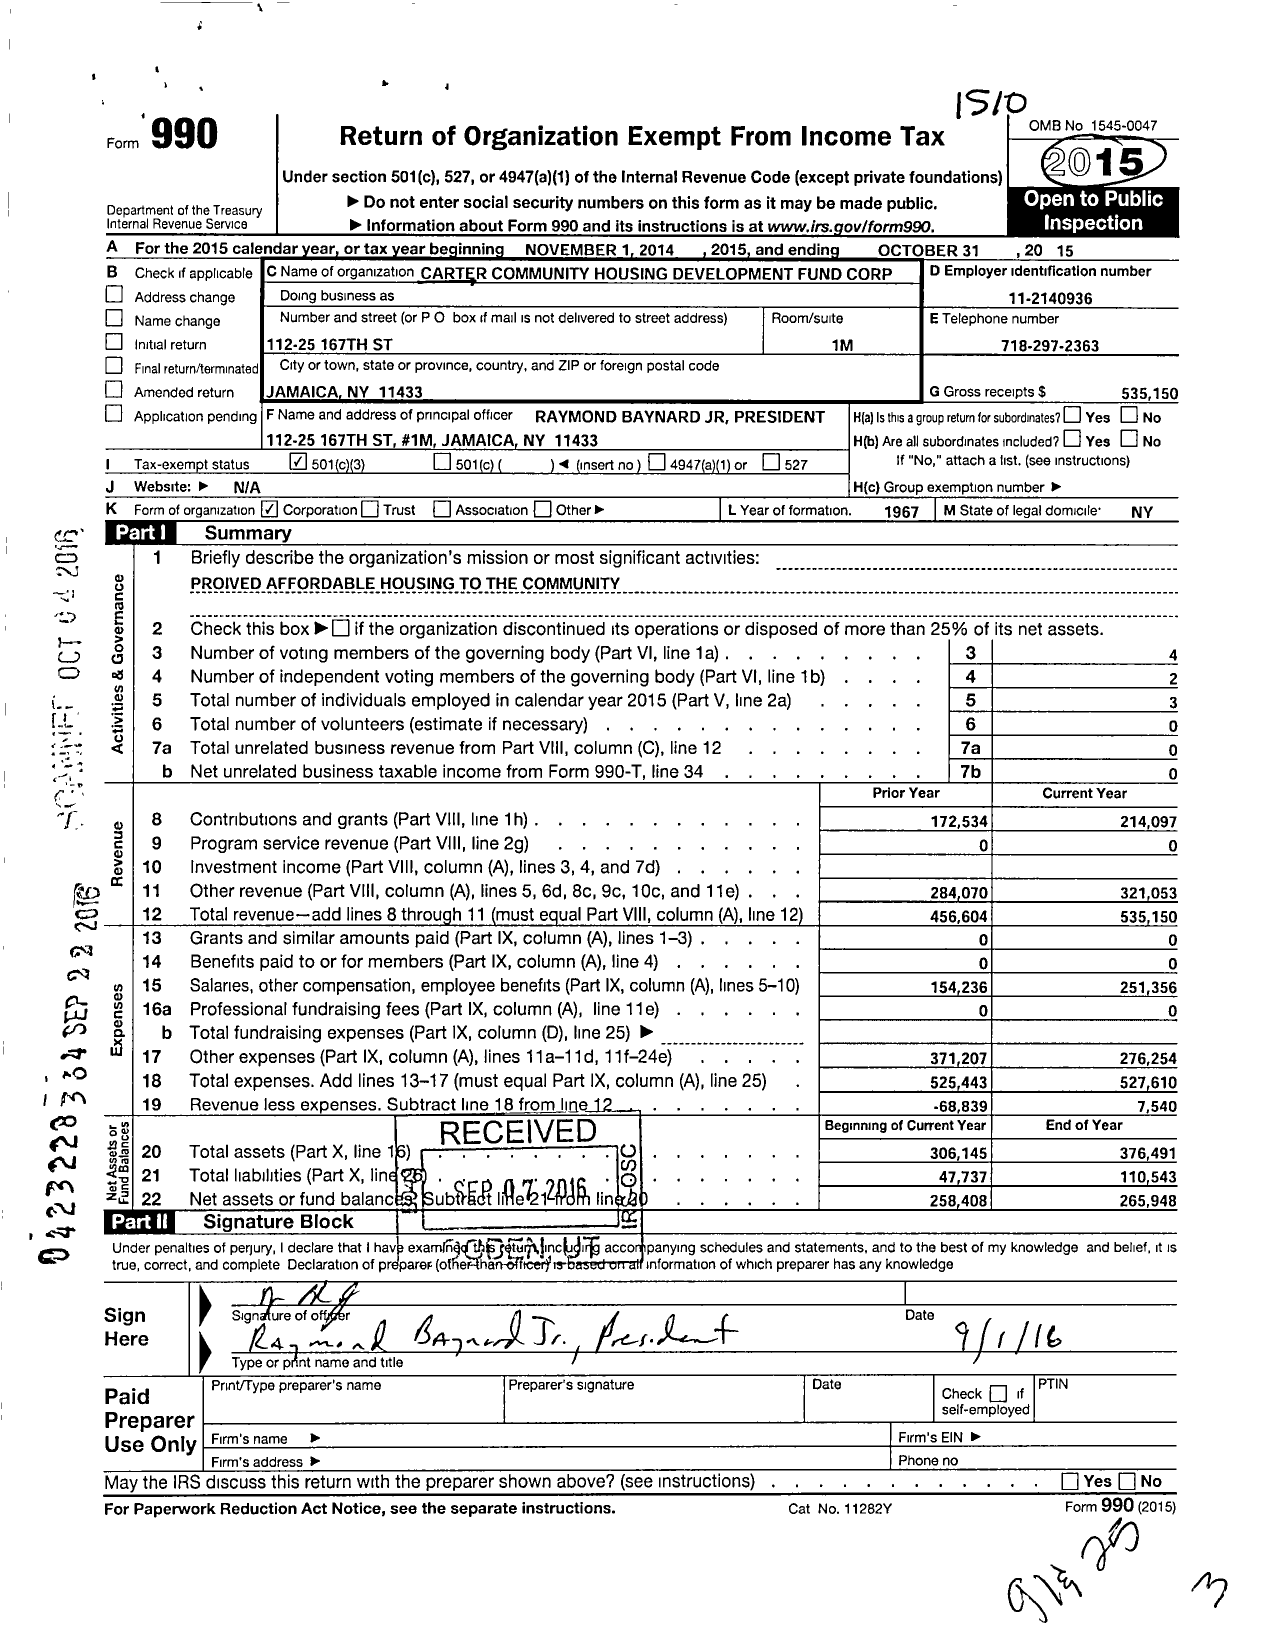 Image of first page of 2014 Form 990 for Carter Community Housing Development Fund Corporation